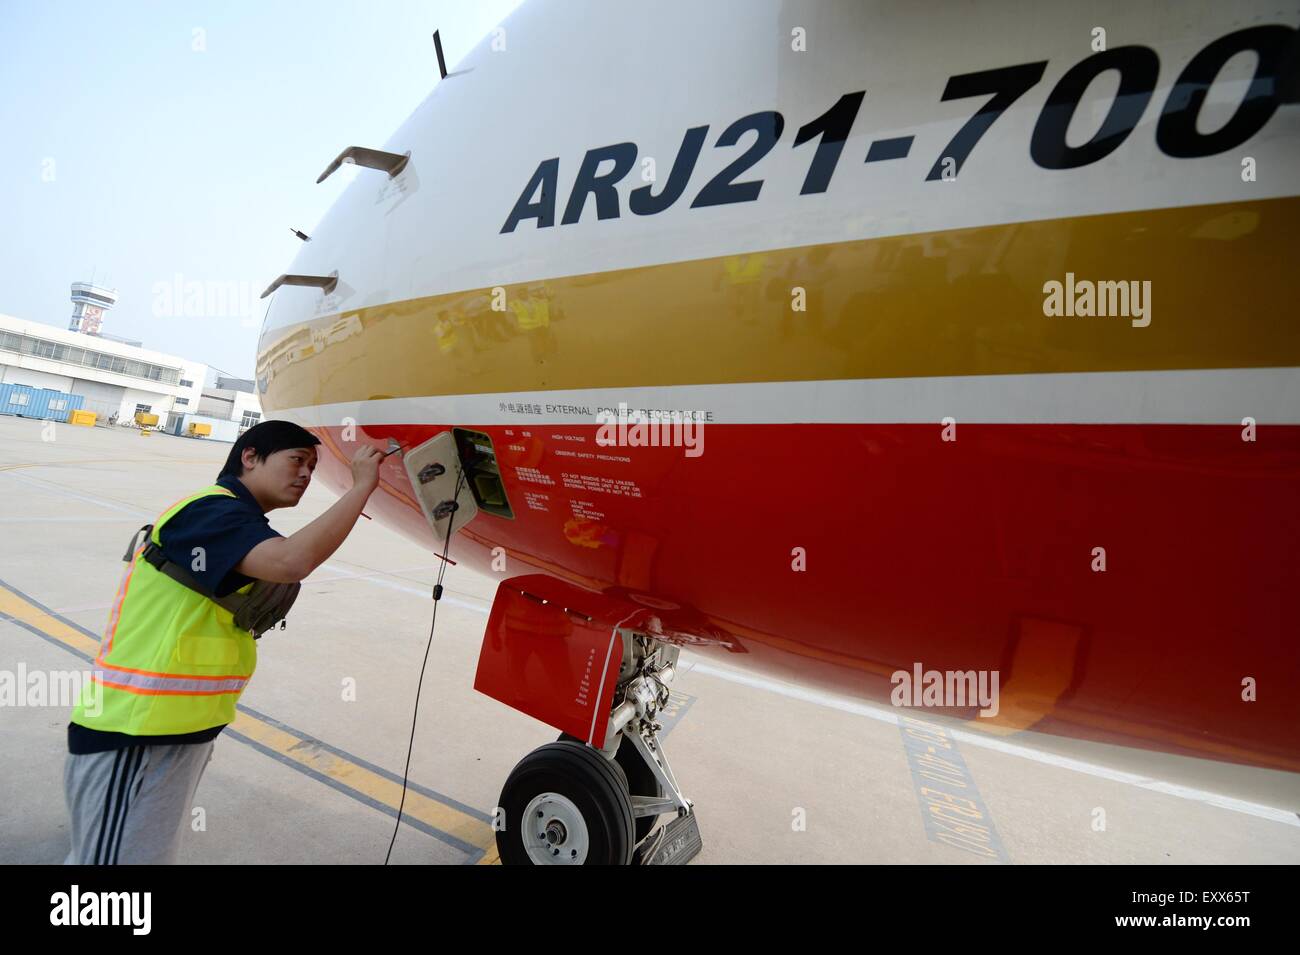 Xi'an, China's Shaanxi Province. 17th July, 2015. A ground crew member checks the ARJ21-700 jet after a demonstration flight in Xi'an, capital city of northwest China's Shaanxi Province, July 17, 2015. The ARJ21, short for Advanced Regional Jet for the 21st Century, is a type of regional airliner designed and manufactured by the Commercial Aircraft Corporation of China (COMAC). Over twenty representatives were invited on Friday to experience the one-hour demonstration flight and give feedbacks so as to help improve the overall performance of the jet. © Li Yibo/Xinhua/Alamy Live News Stock Photo